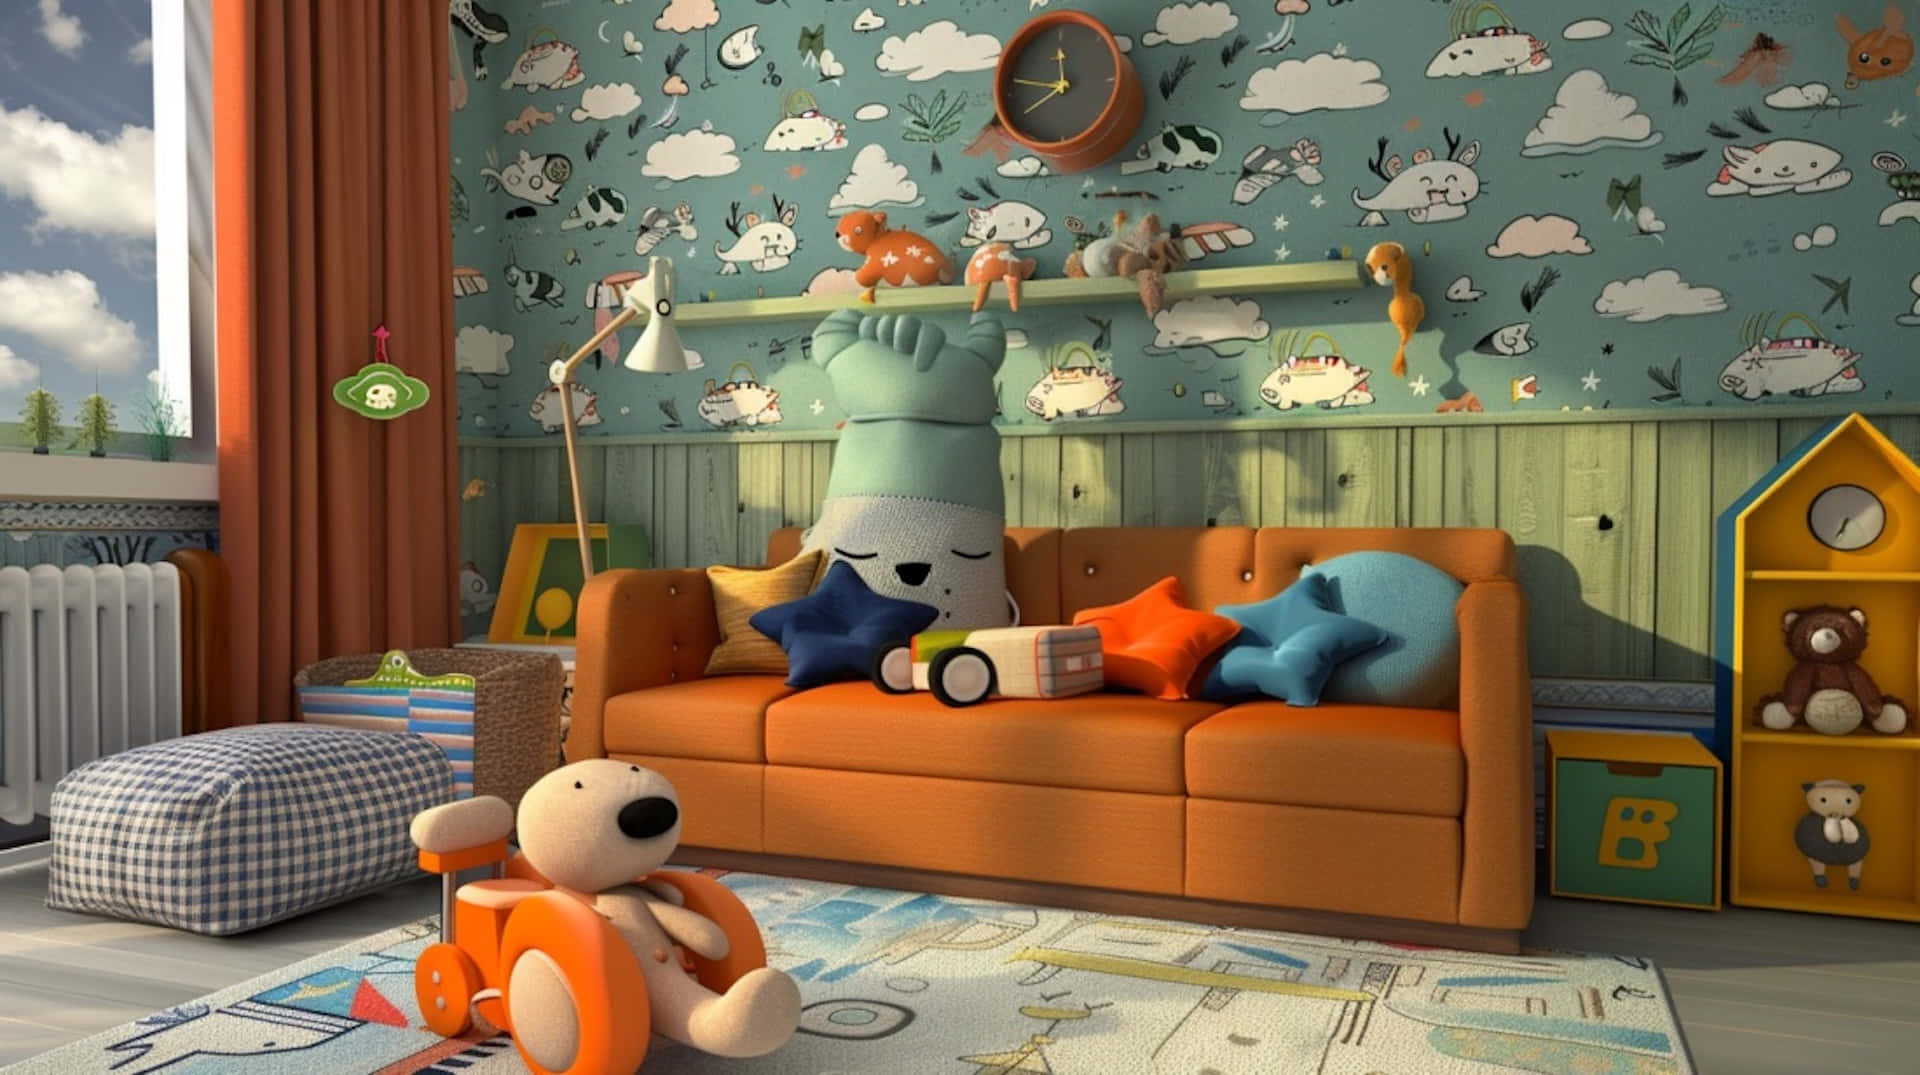 Cozy Childrens Room With Toys Wallpaper